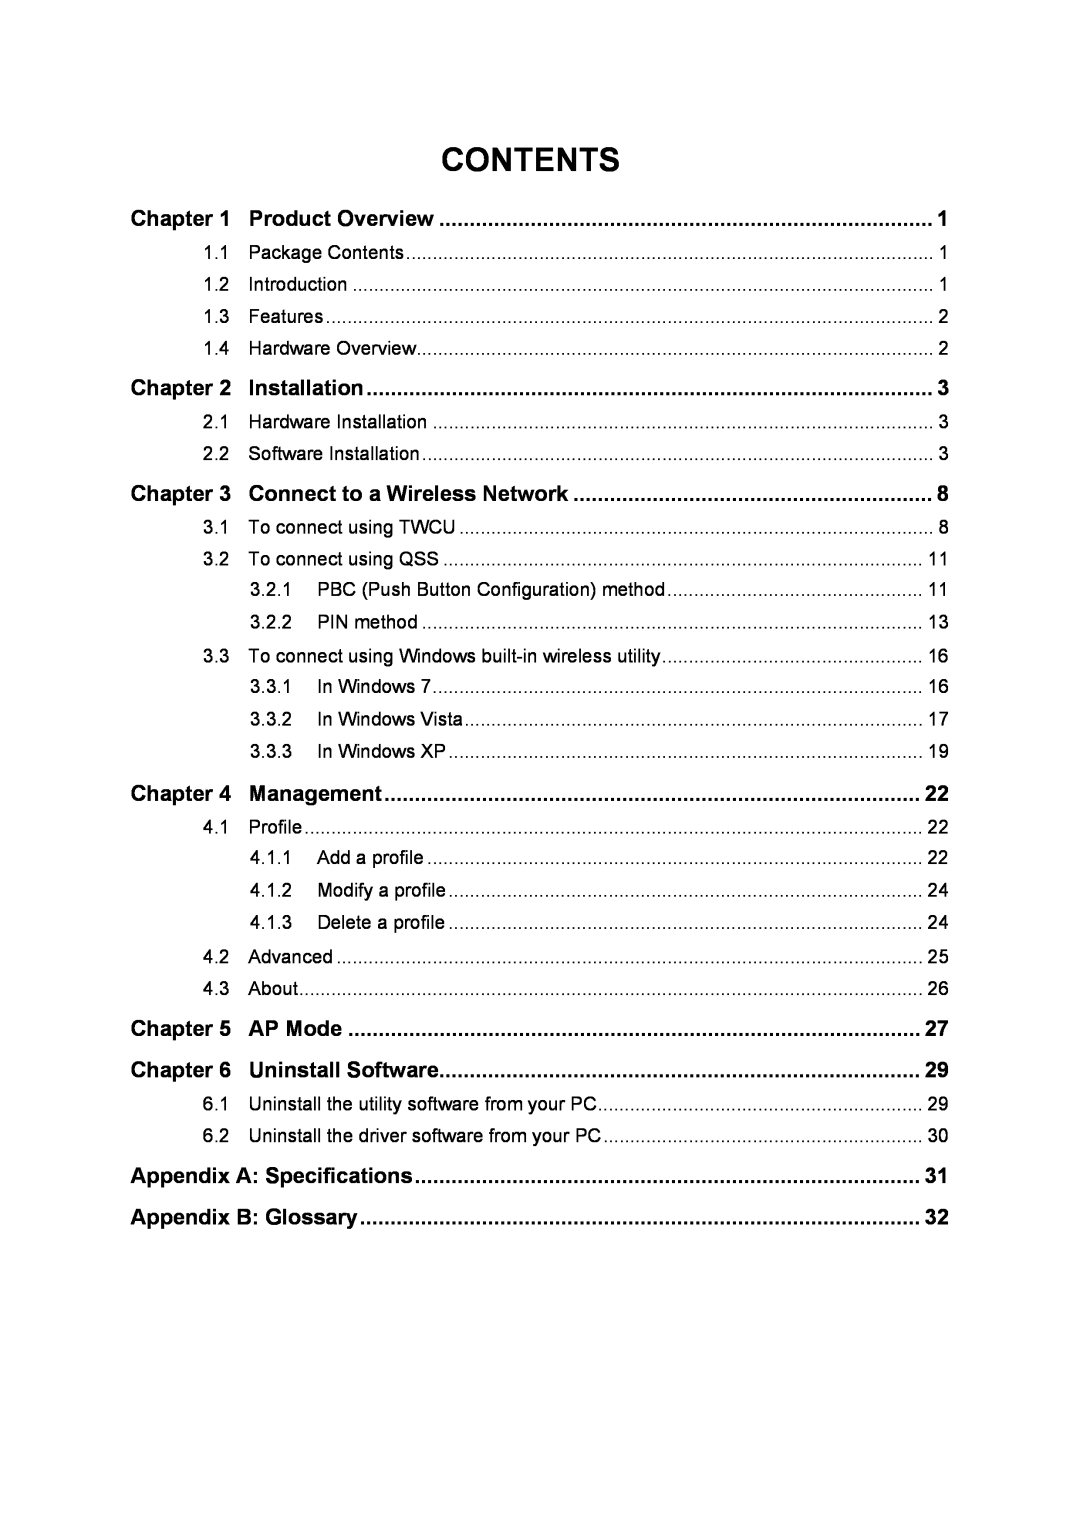 TP-Link TL-WN851ND manual Contents 